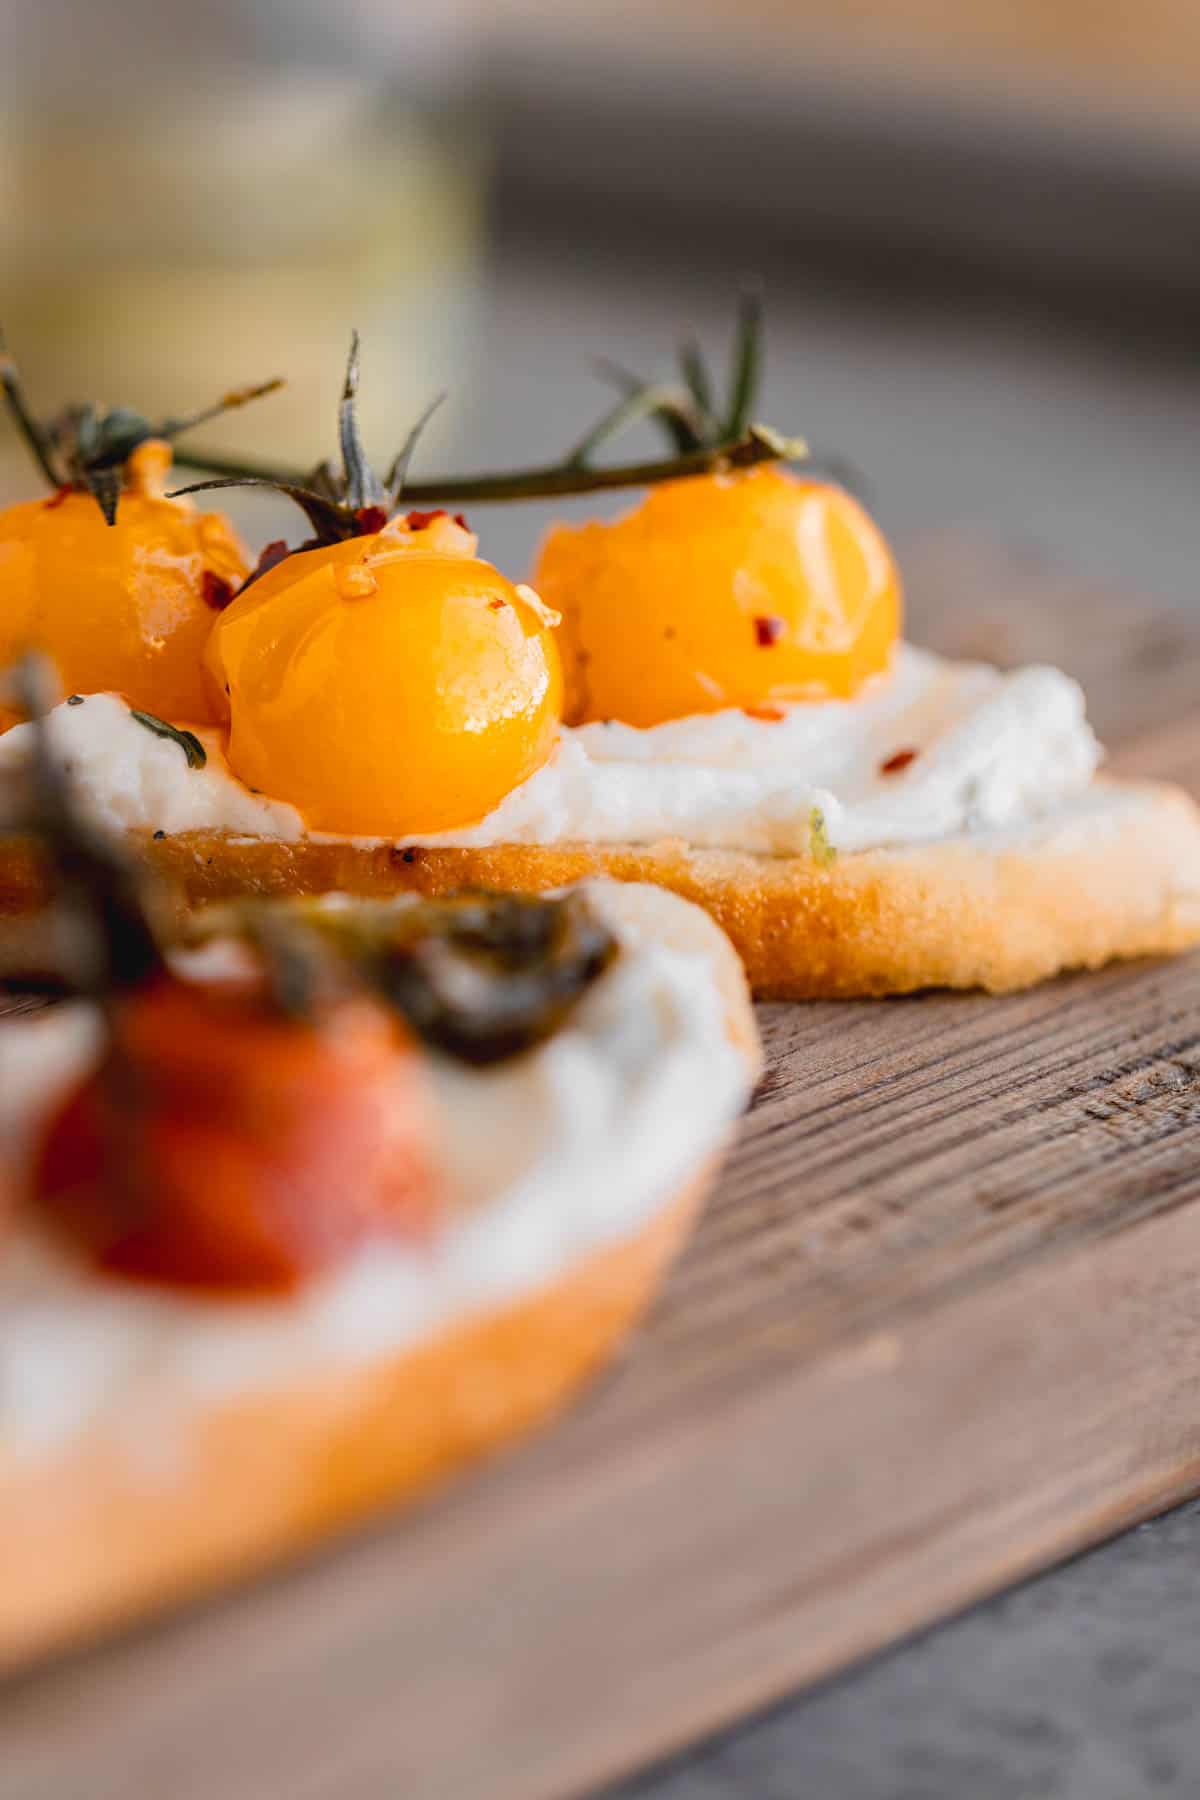 Cherry tomato confit on a crostini with whipped goat cheese. 